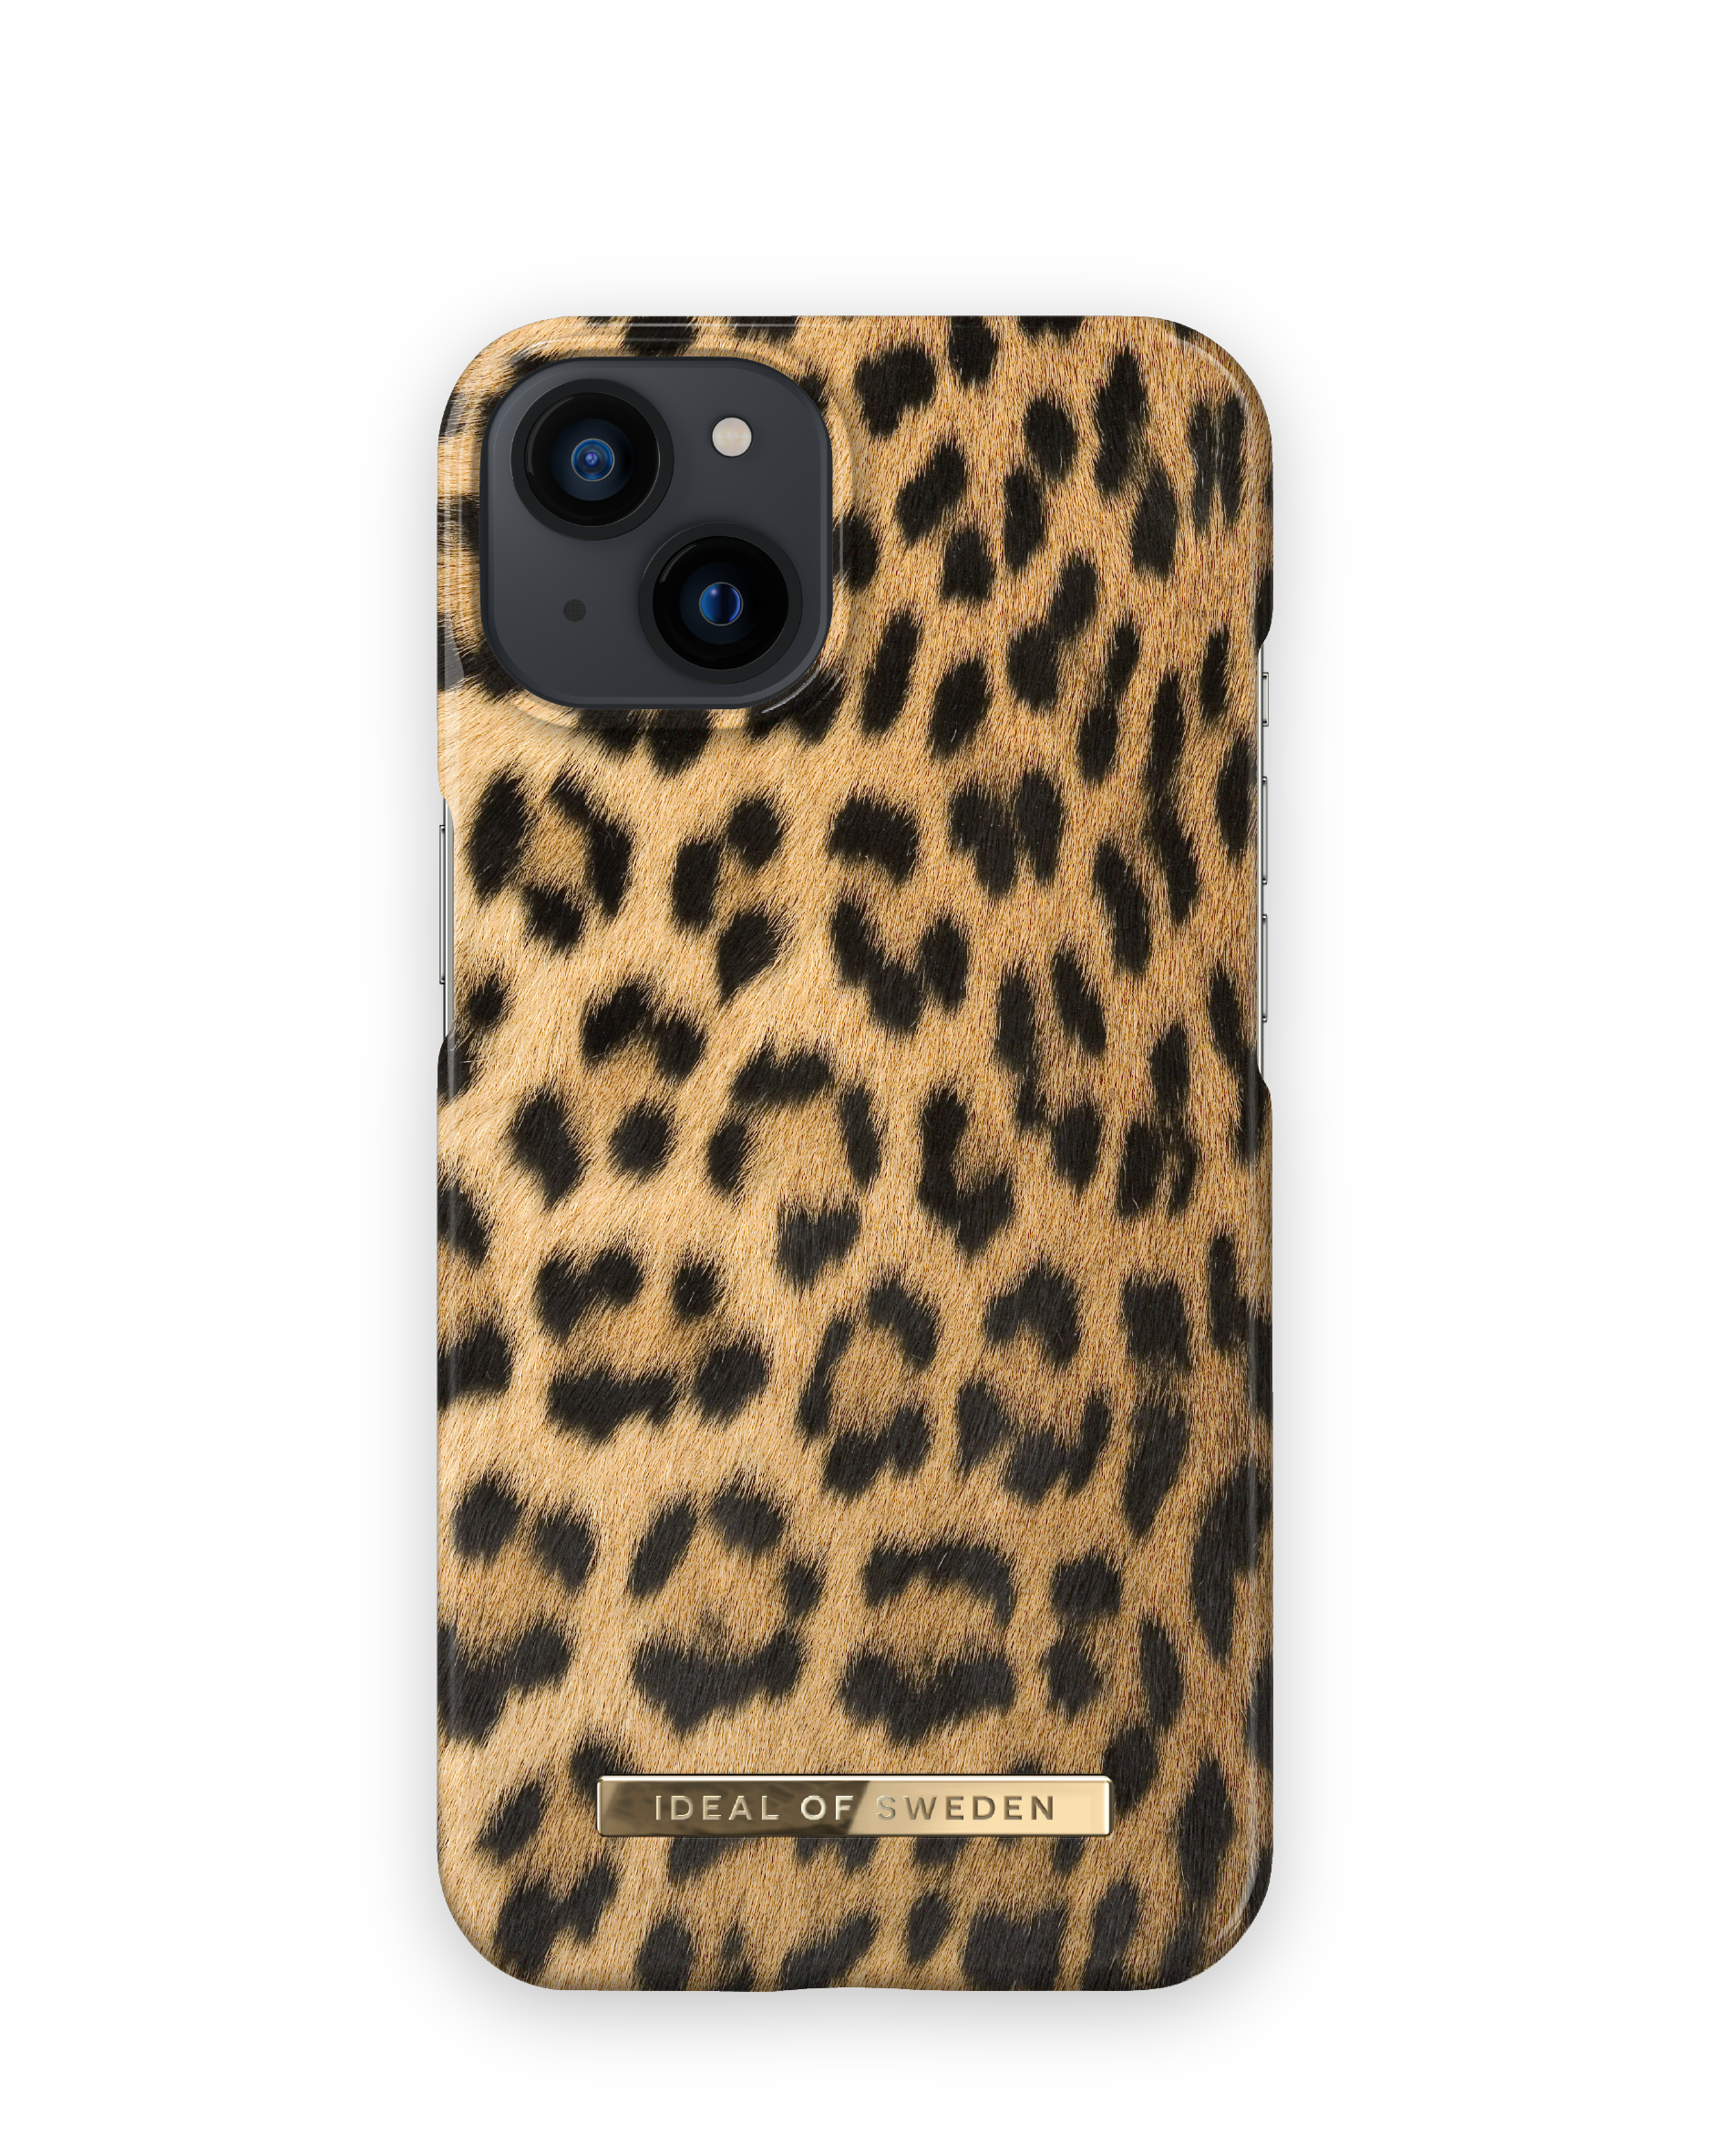 IDEAL OF Backcover, Apple, 13 Wild Mini, SWEDEN iPhone IDFCS17-I2154-67, Leopard